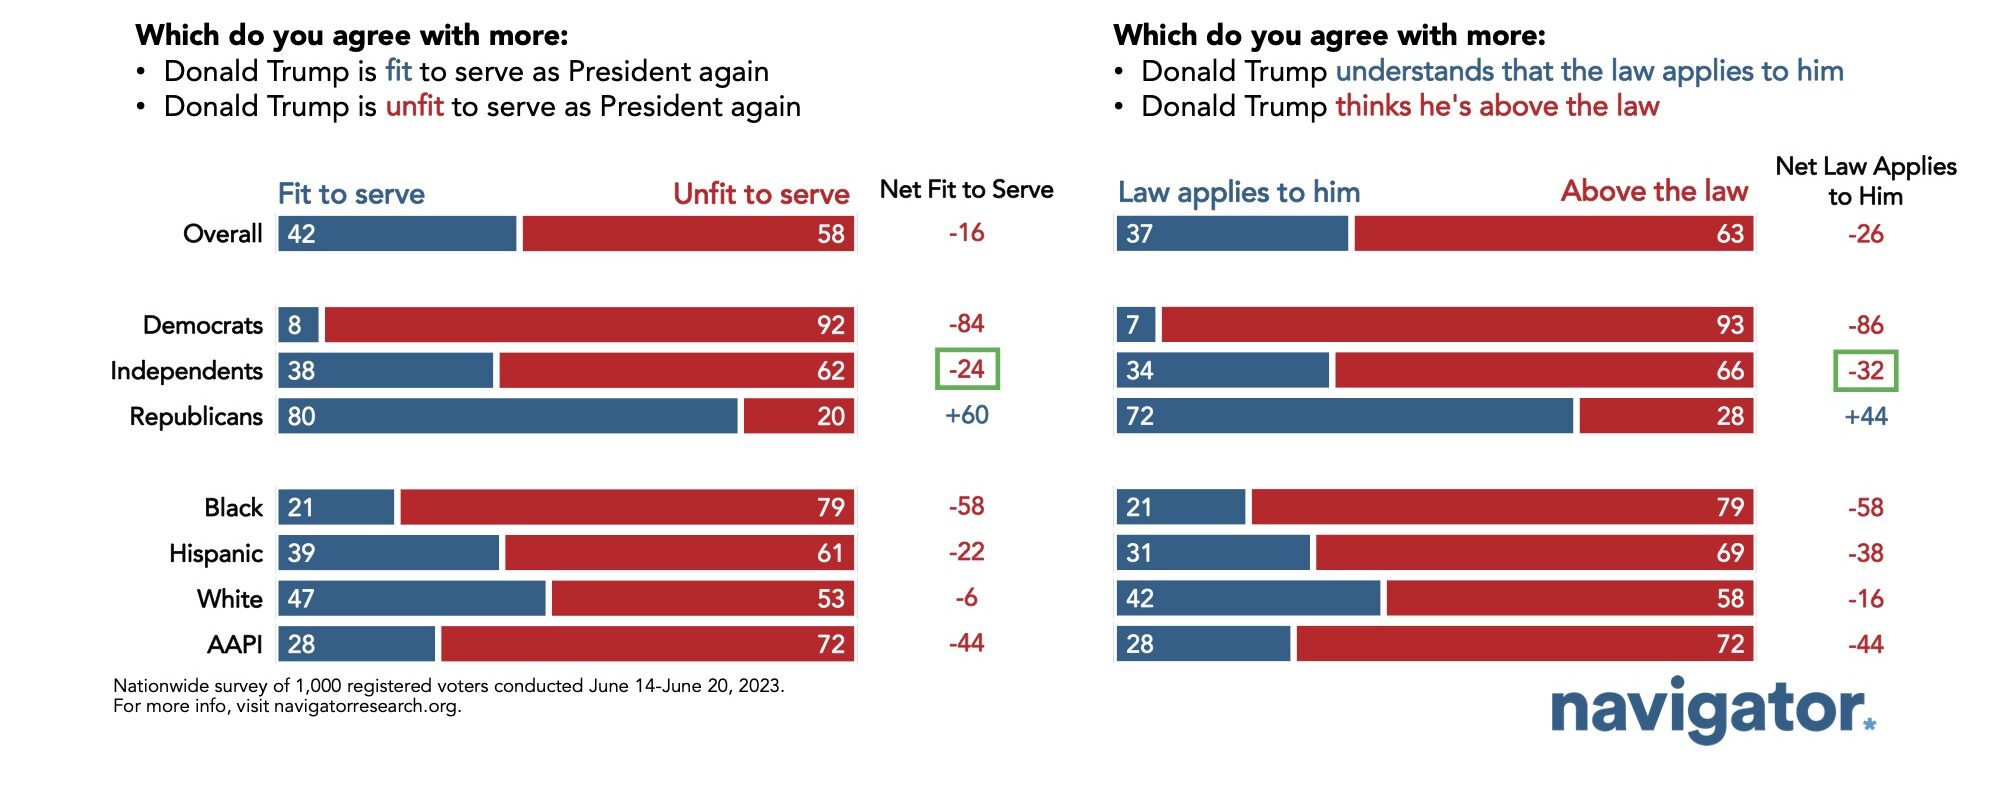 Bar graphs showing survey results to the following questions after Trump's indictment: Which do you agree with more: • Donald Trump is fit to serve as President again • Donald Trump is unfit to serve as President again Which do you agree with more: • Donald Trump understands that the law applies to him • Donald Trump thinks he's above the law